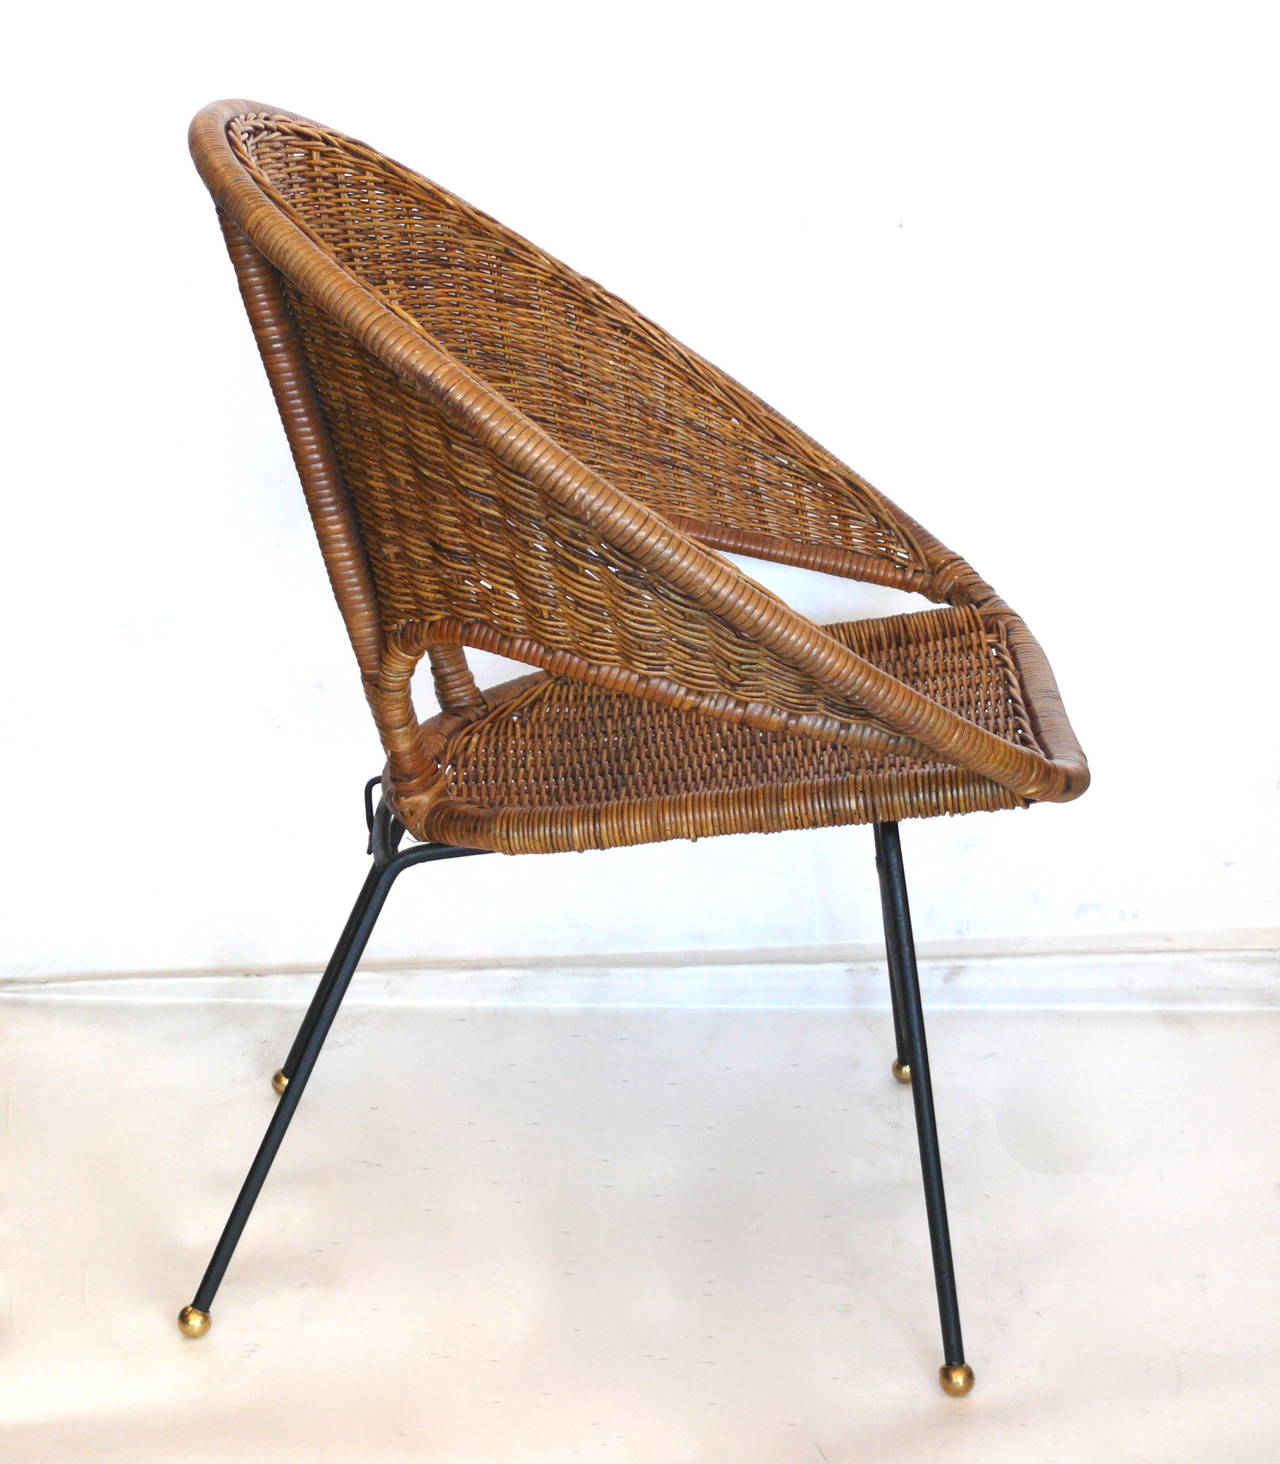 Mid-20th Century Sculptural Wicker and Rattan Chairs